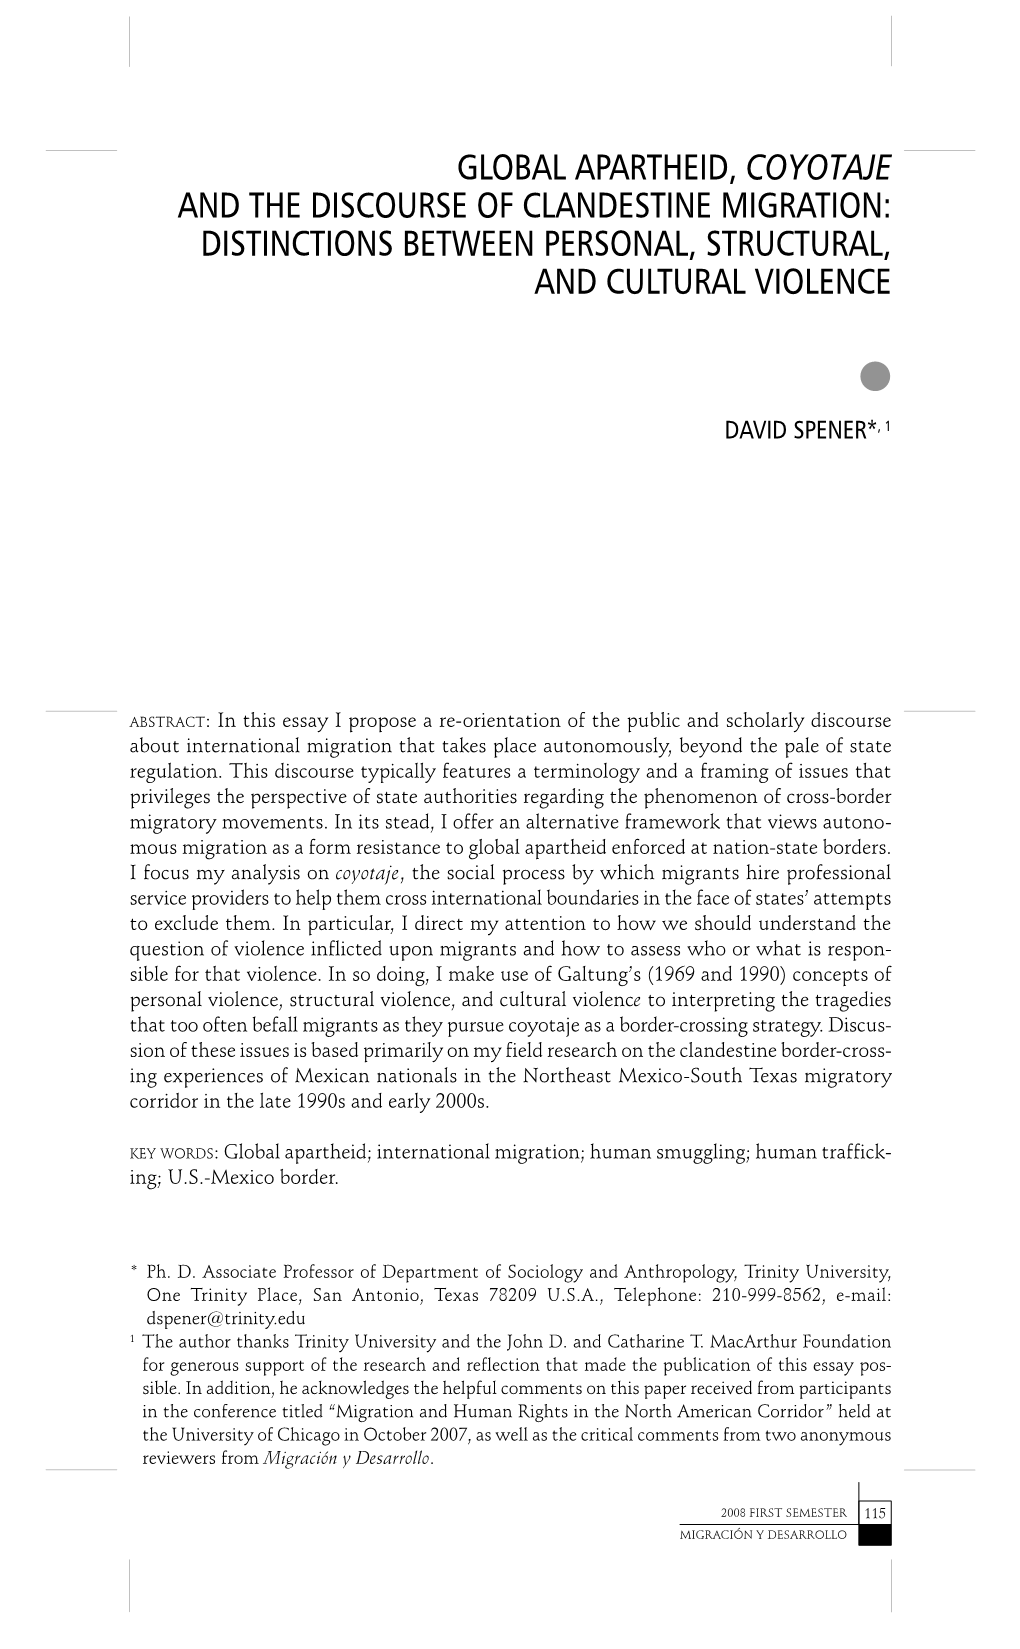 Global Apartheid, Coyotaje and the Discourse of Clandestine Migration: Distinctions Between Personal, Structural, and Cultural Violence